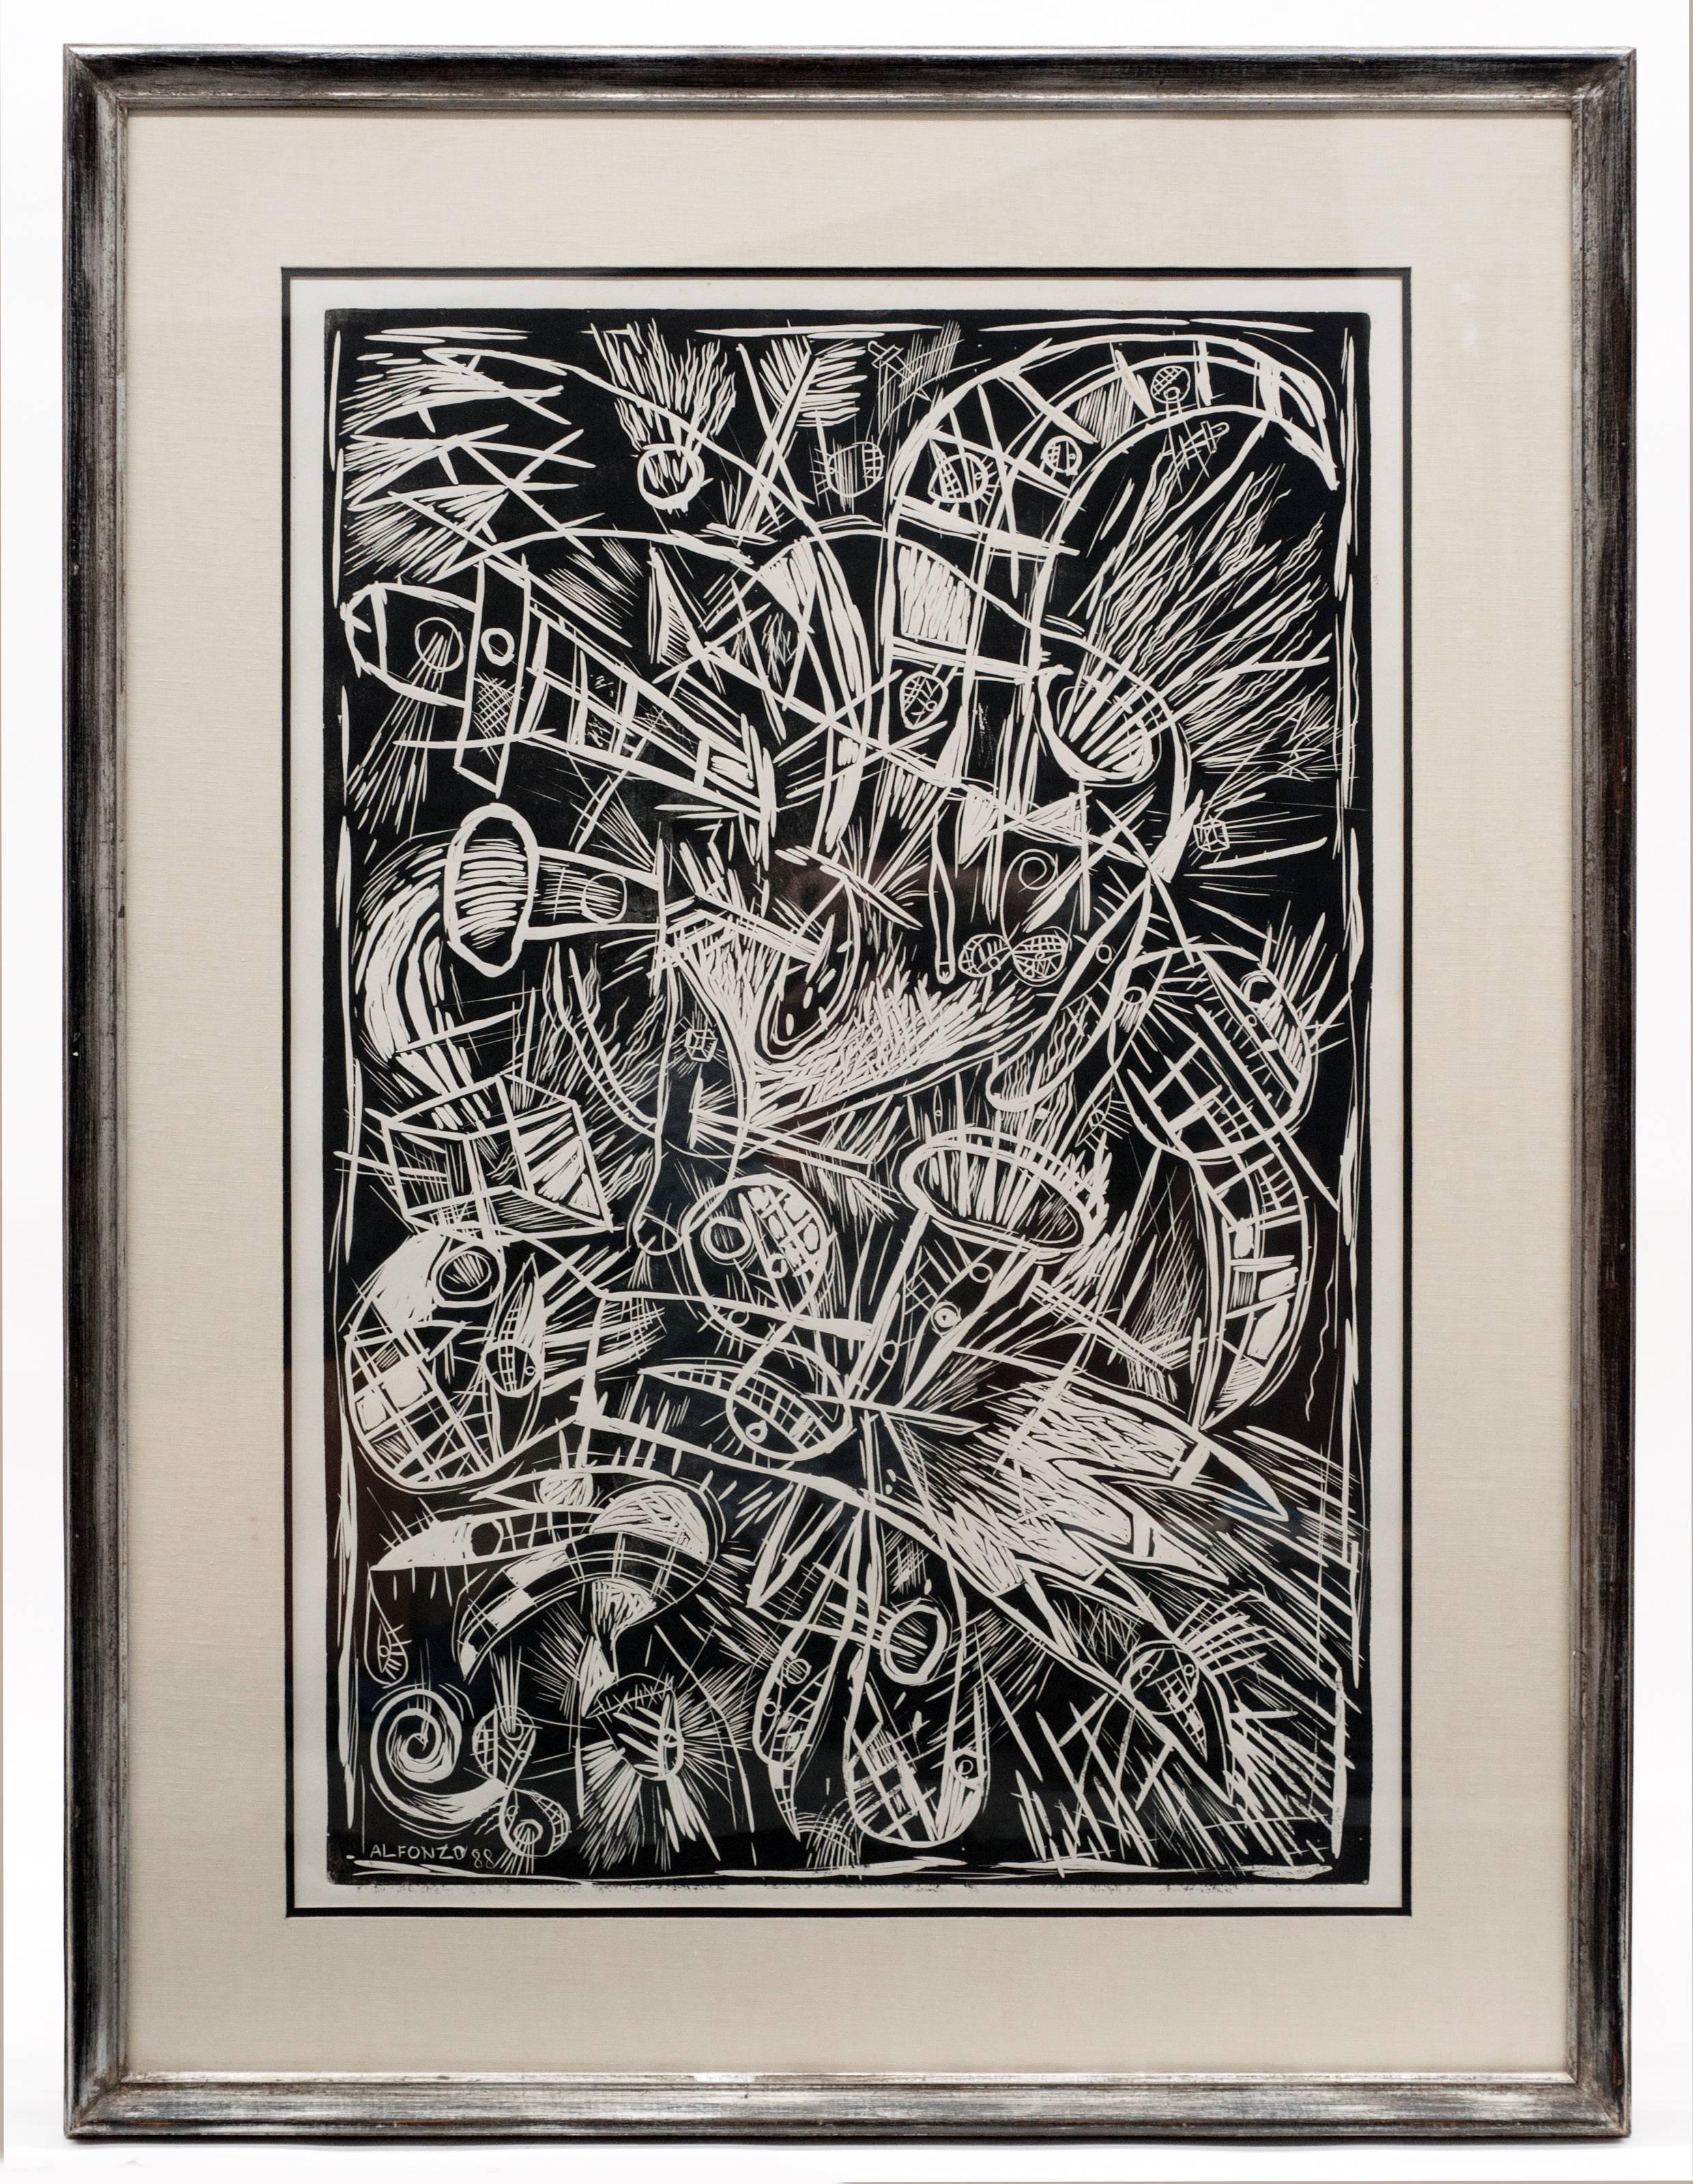 Large, one-of-a-kind block print by Carlos Alfonzo. This is the only known one of this work by the artist. Signed and dated 88' in lower left corner.  The block print is professionally framed and in excellent condition. Measures 47.5 inches H x 35.5